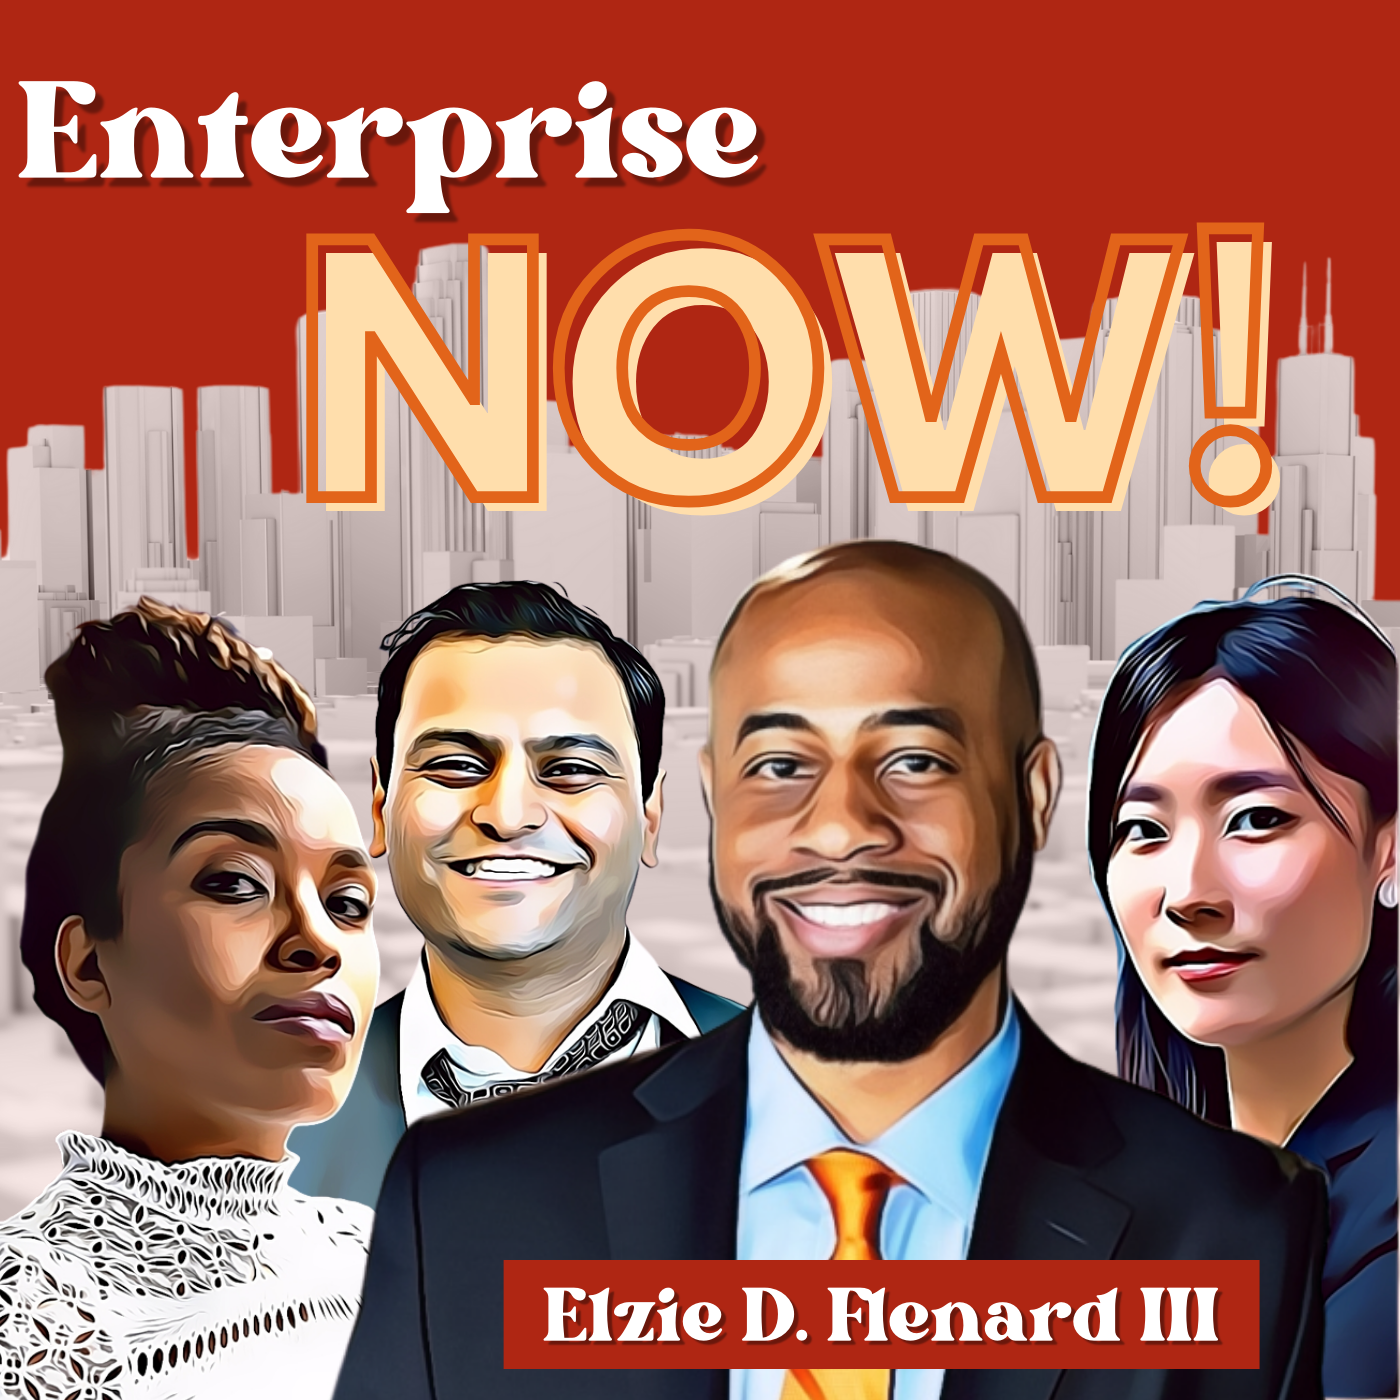 Join the Enterprisers!